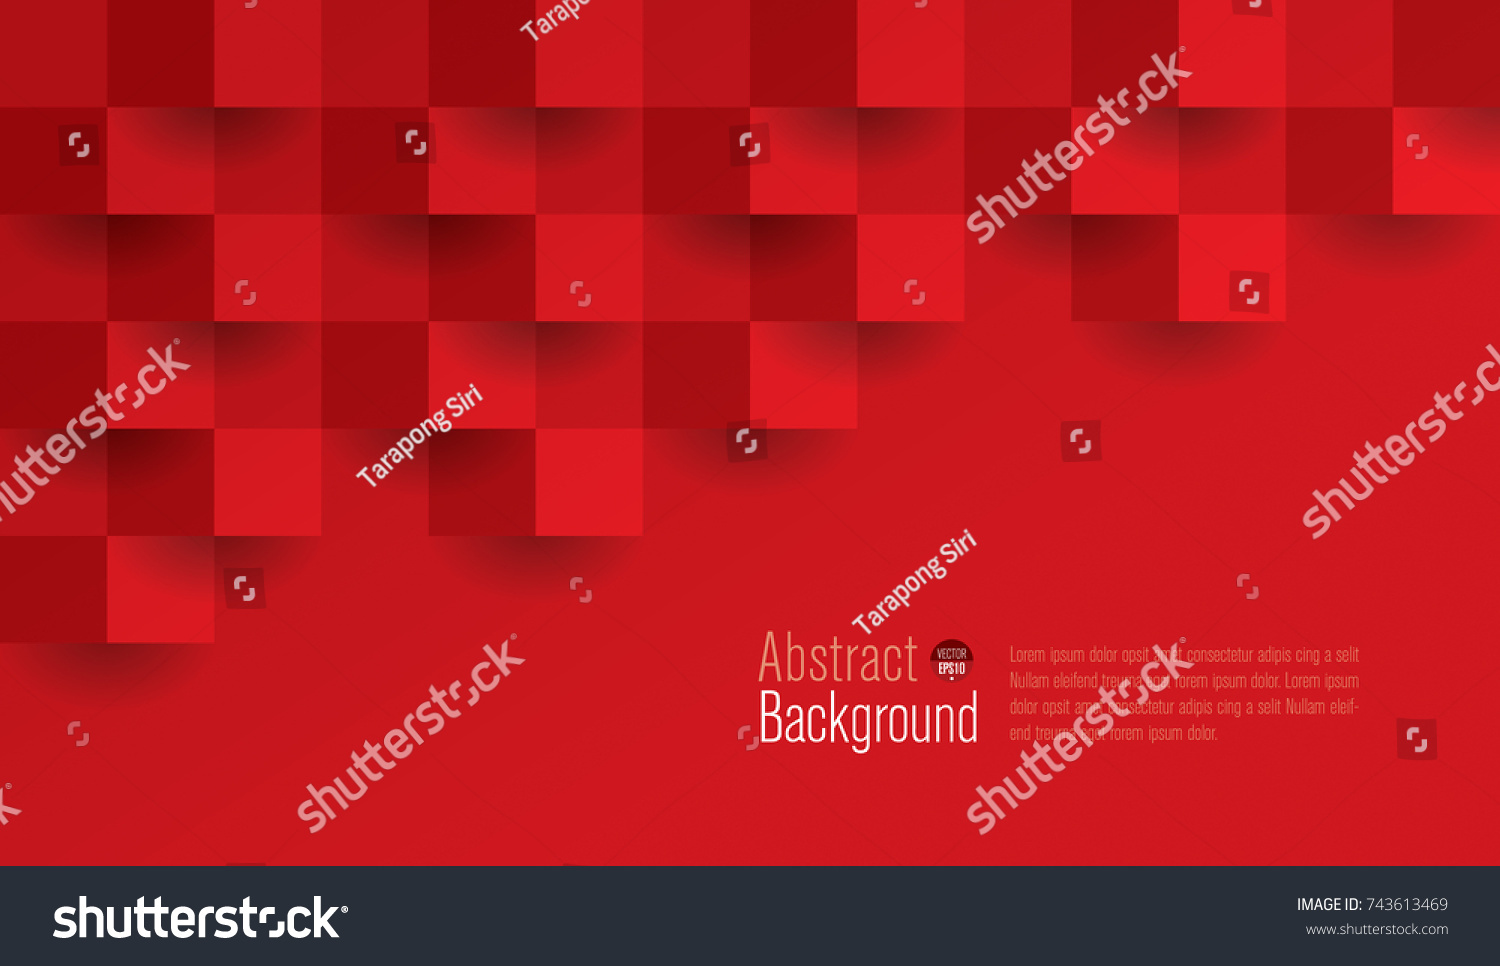 Red geometric texture. Abstract background vector can be used in cover design, book design, website background, banner, poster, advertising. #743613469